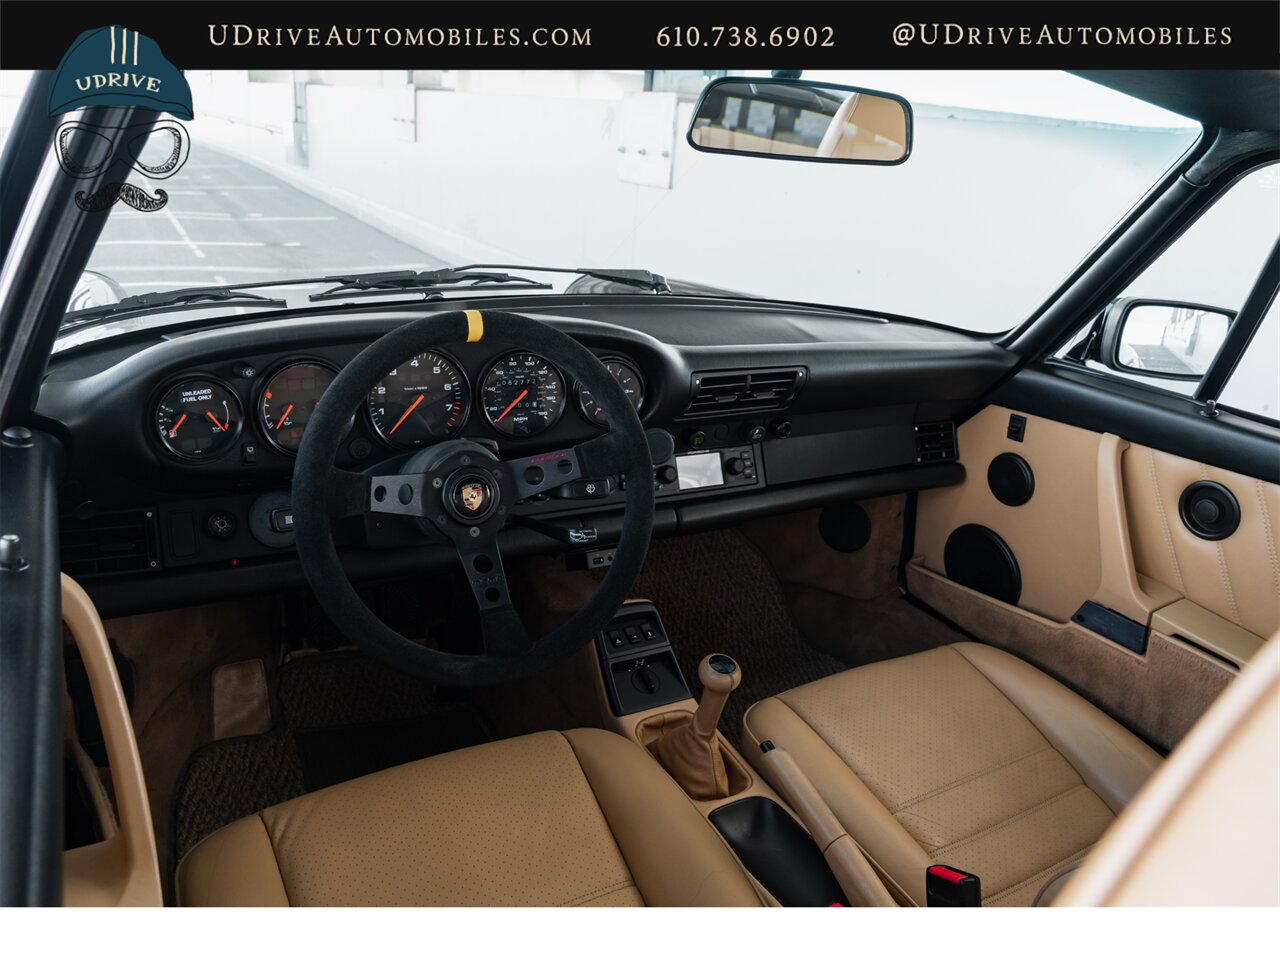 1989 Porsche 911 Carrera 4  964 C4 5 Speed Manual $63k Recent Service and Upgrades - Photo 5 - West Chester, PA 19382